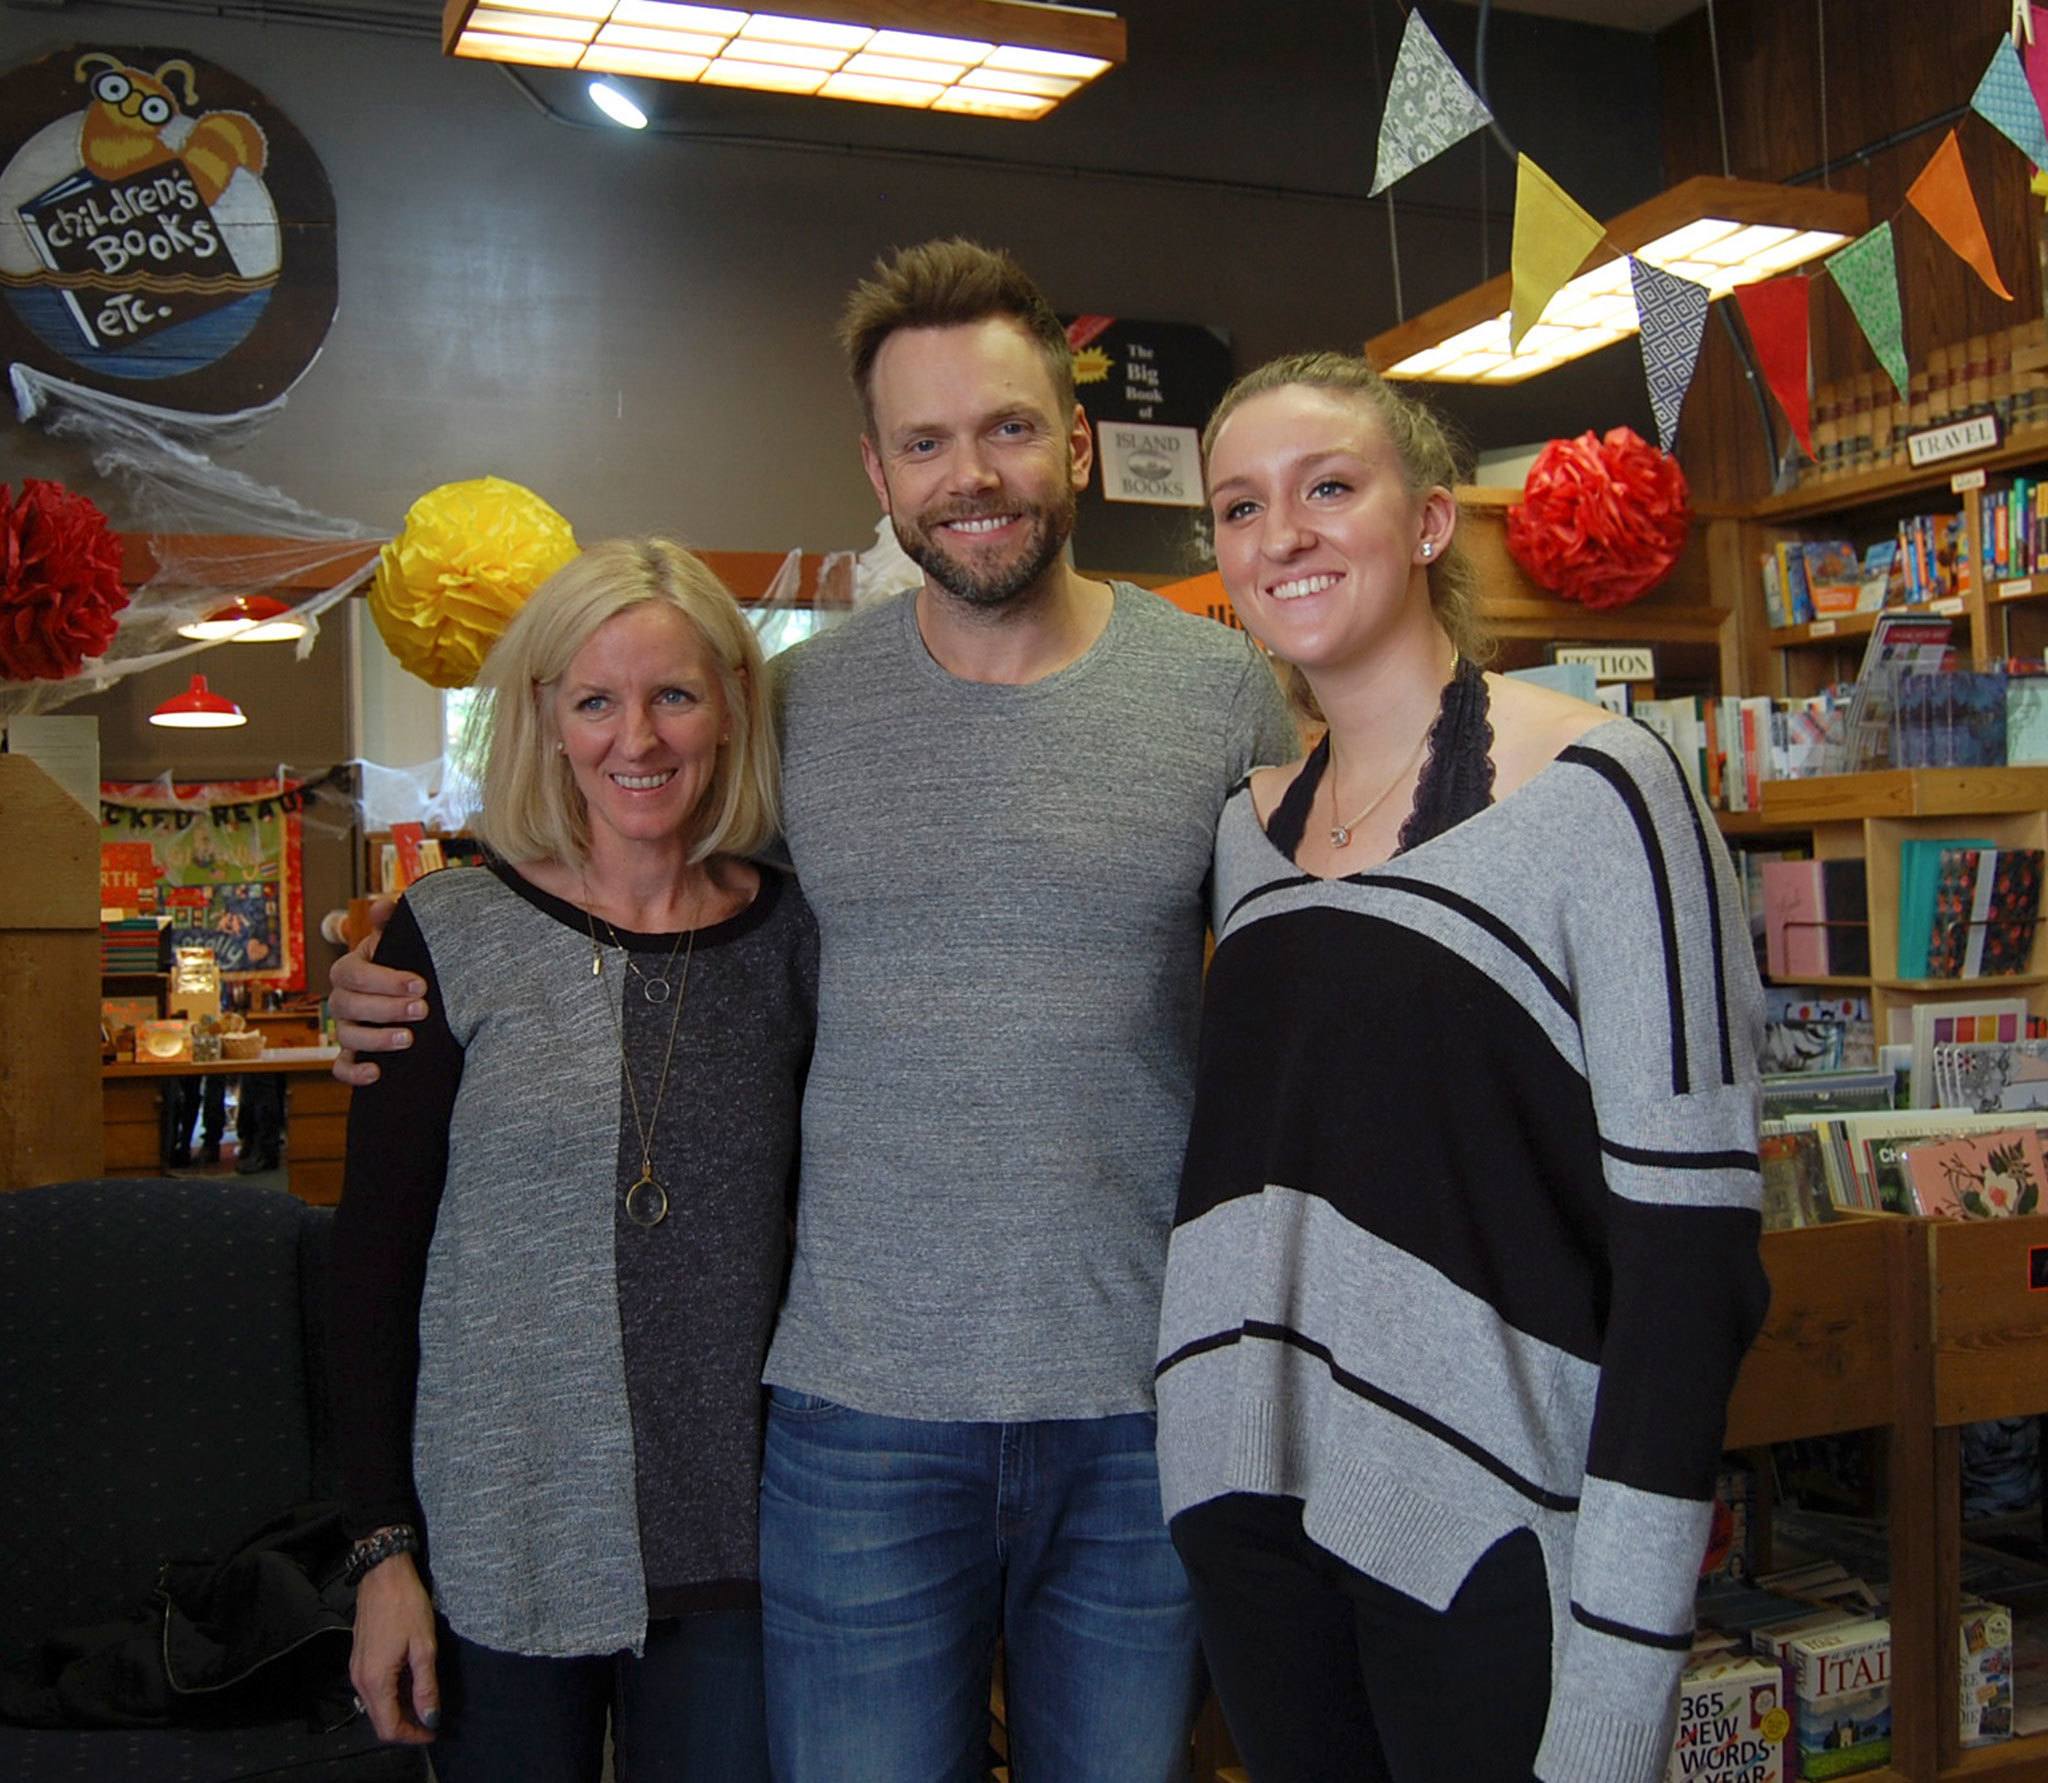 Joel McHale poses with Island Books store owner Laurie Raisys and her daughter Sofija at a signing for his new book, “Thanks for the Money,” on Oct. 29. Katie Metzger/staff photo